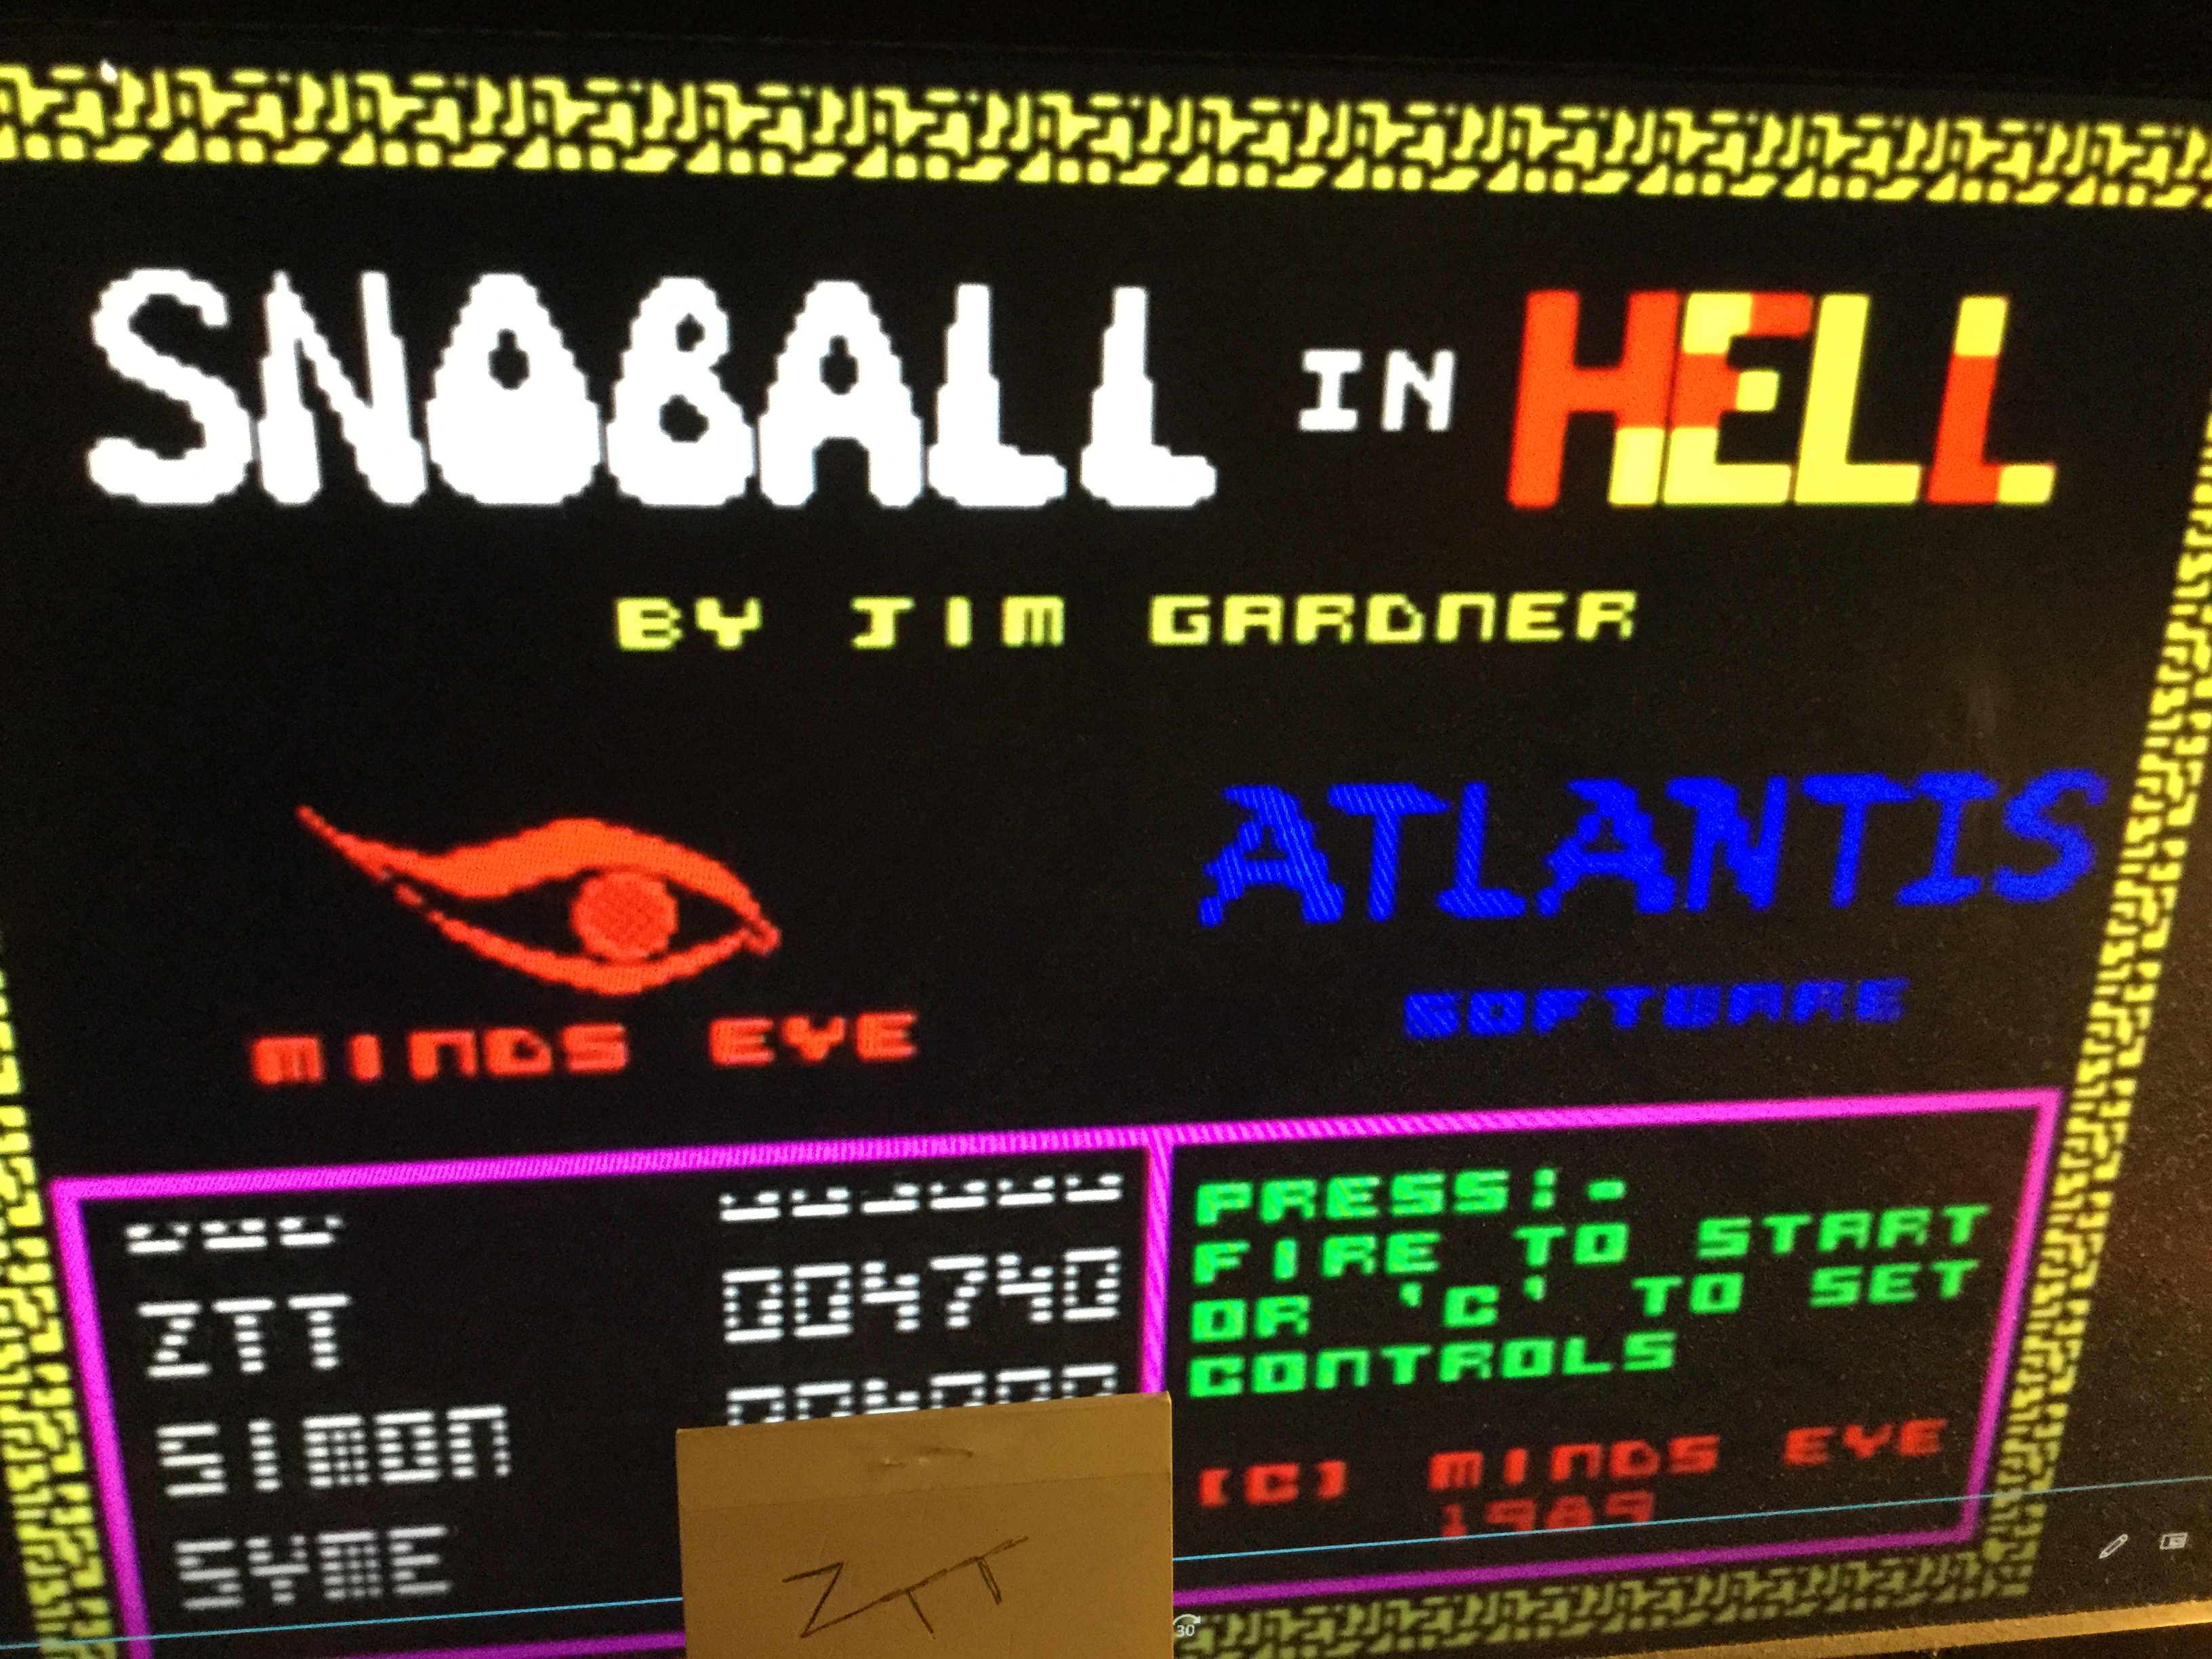 Frankie: Snoball in Hell (ZX Spectrum Emulated) 4,740 points on 2021-05-14 14:09:17